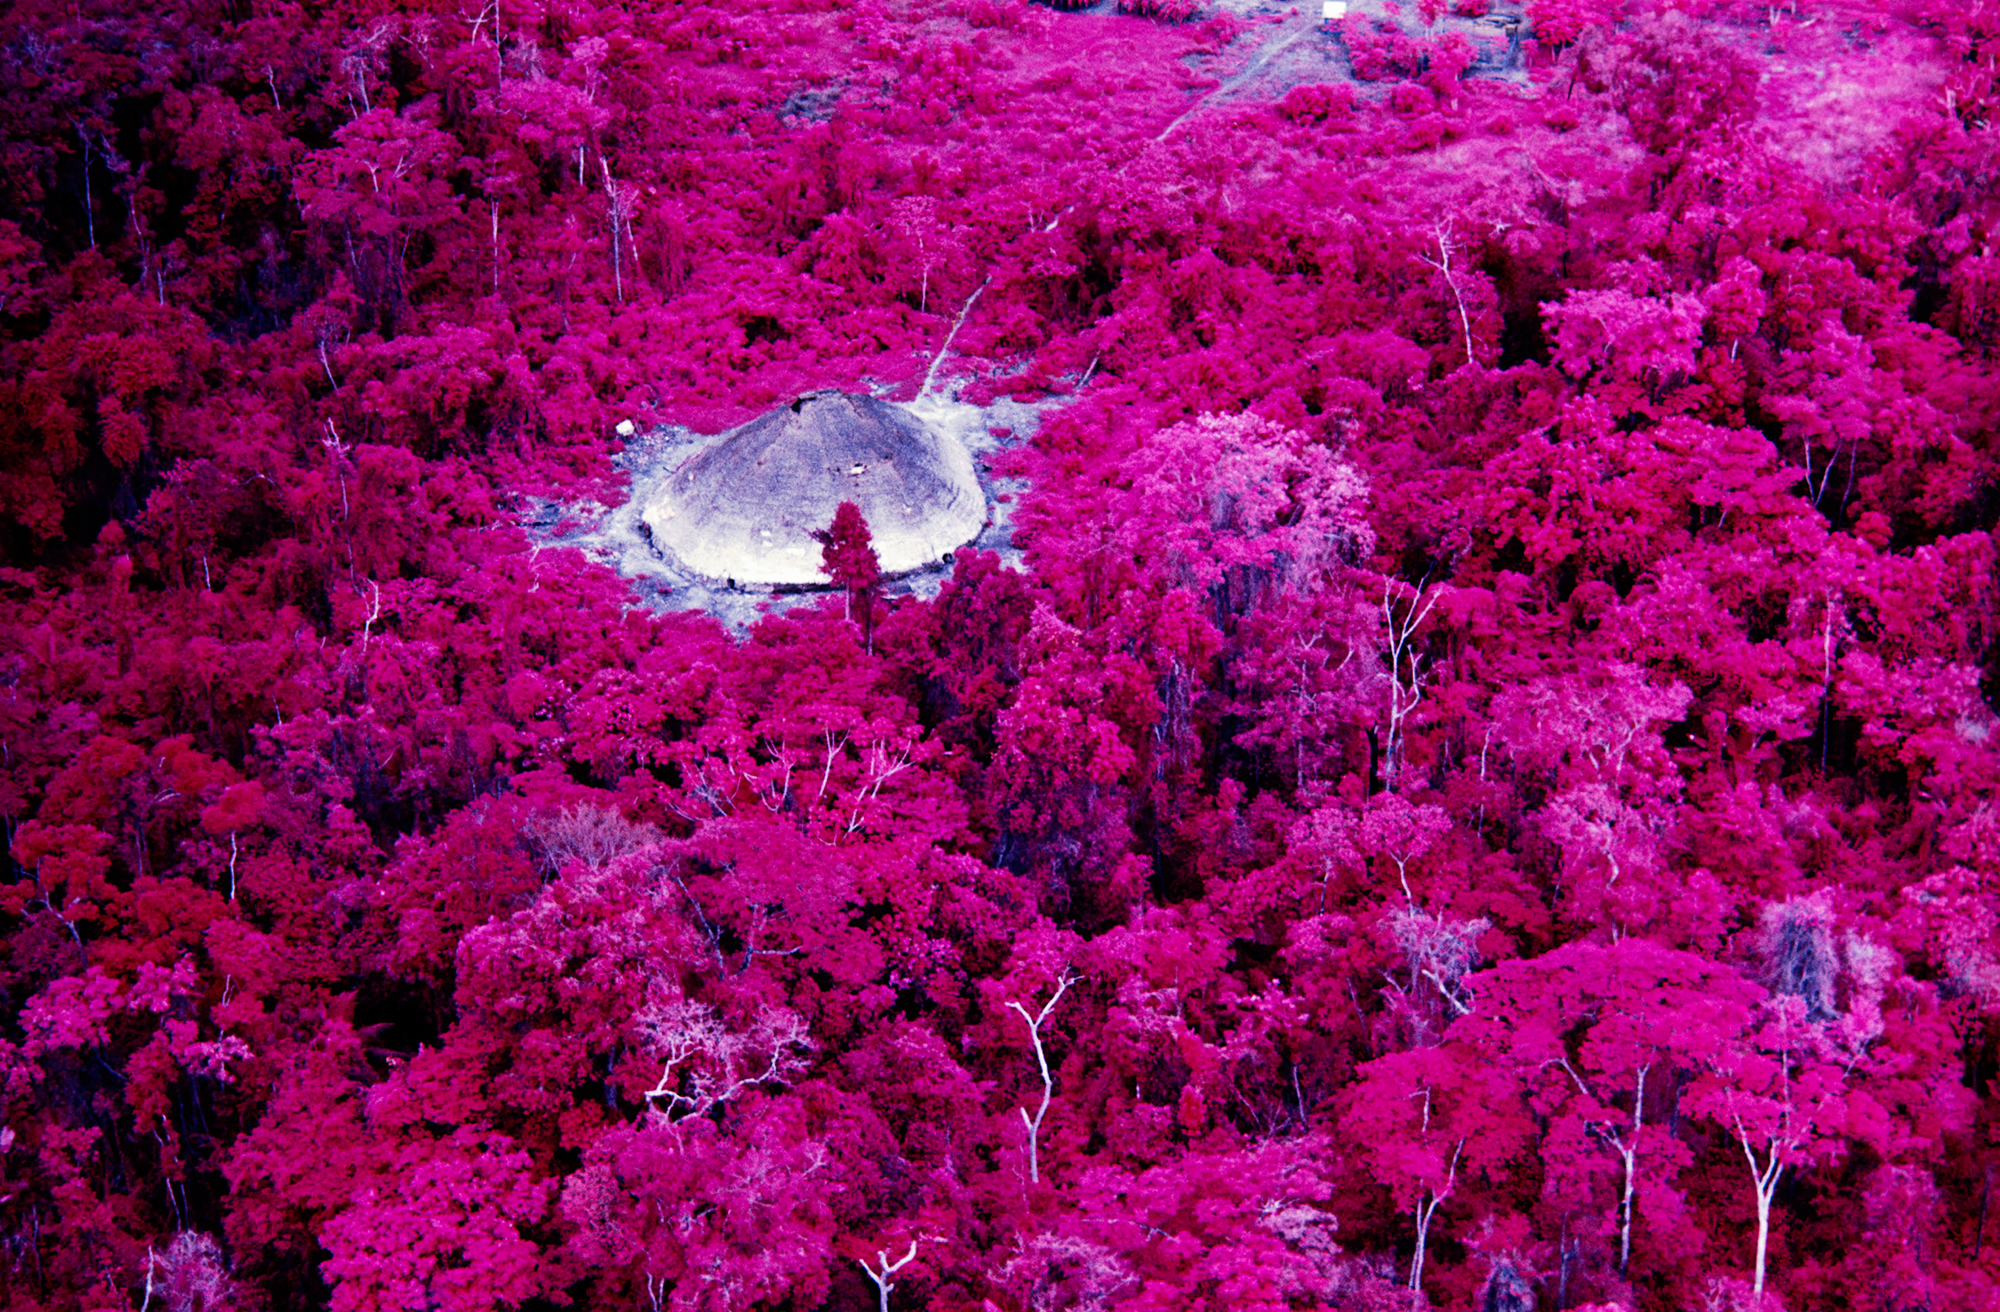 Claudia Andujar, Collective house near the Catholic mission on the Catrimani River, Roraima state, 1976. Mineral pigment print, from infrared film. (68.5 x 102.5 cm). Instituto Moreira Salles Collection 